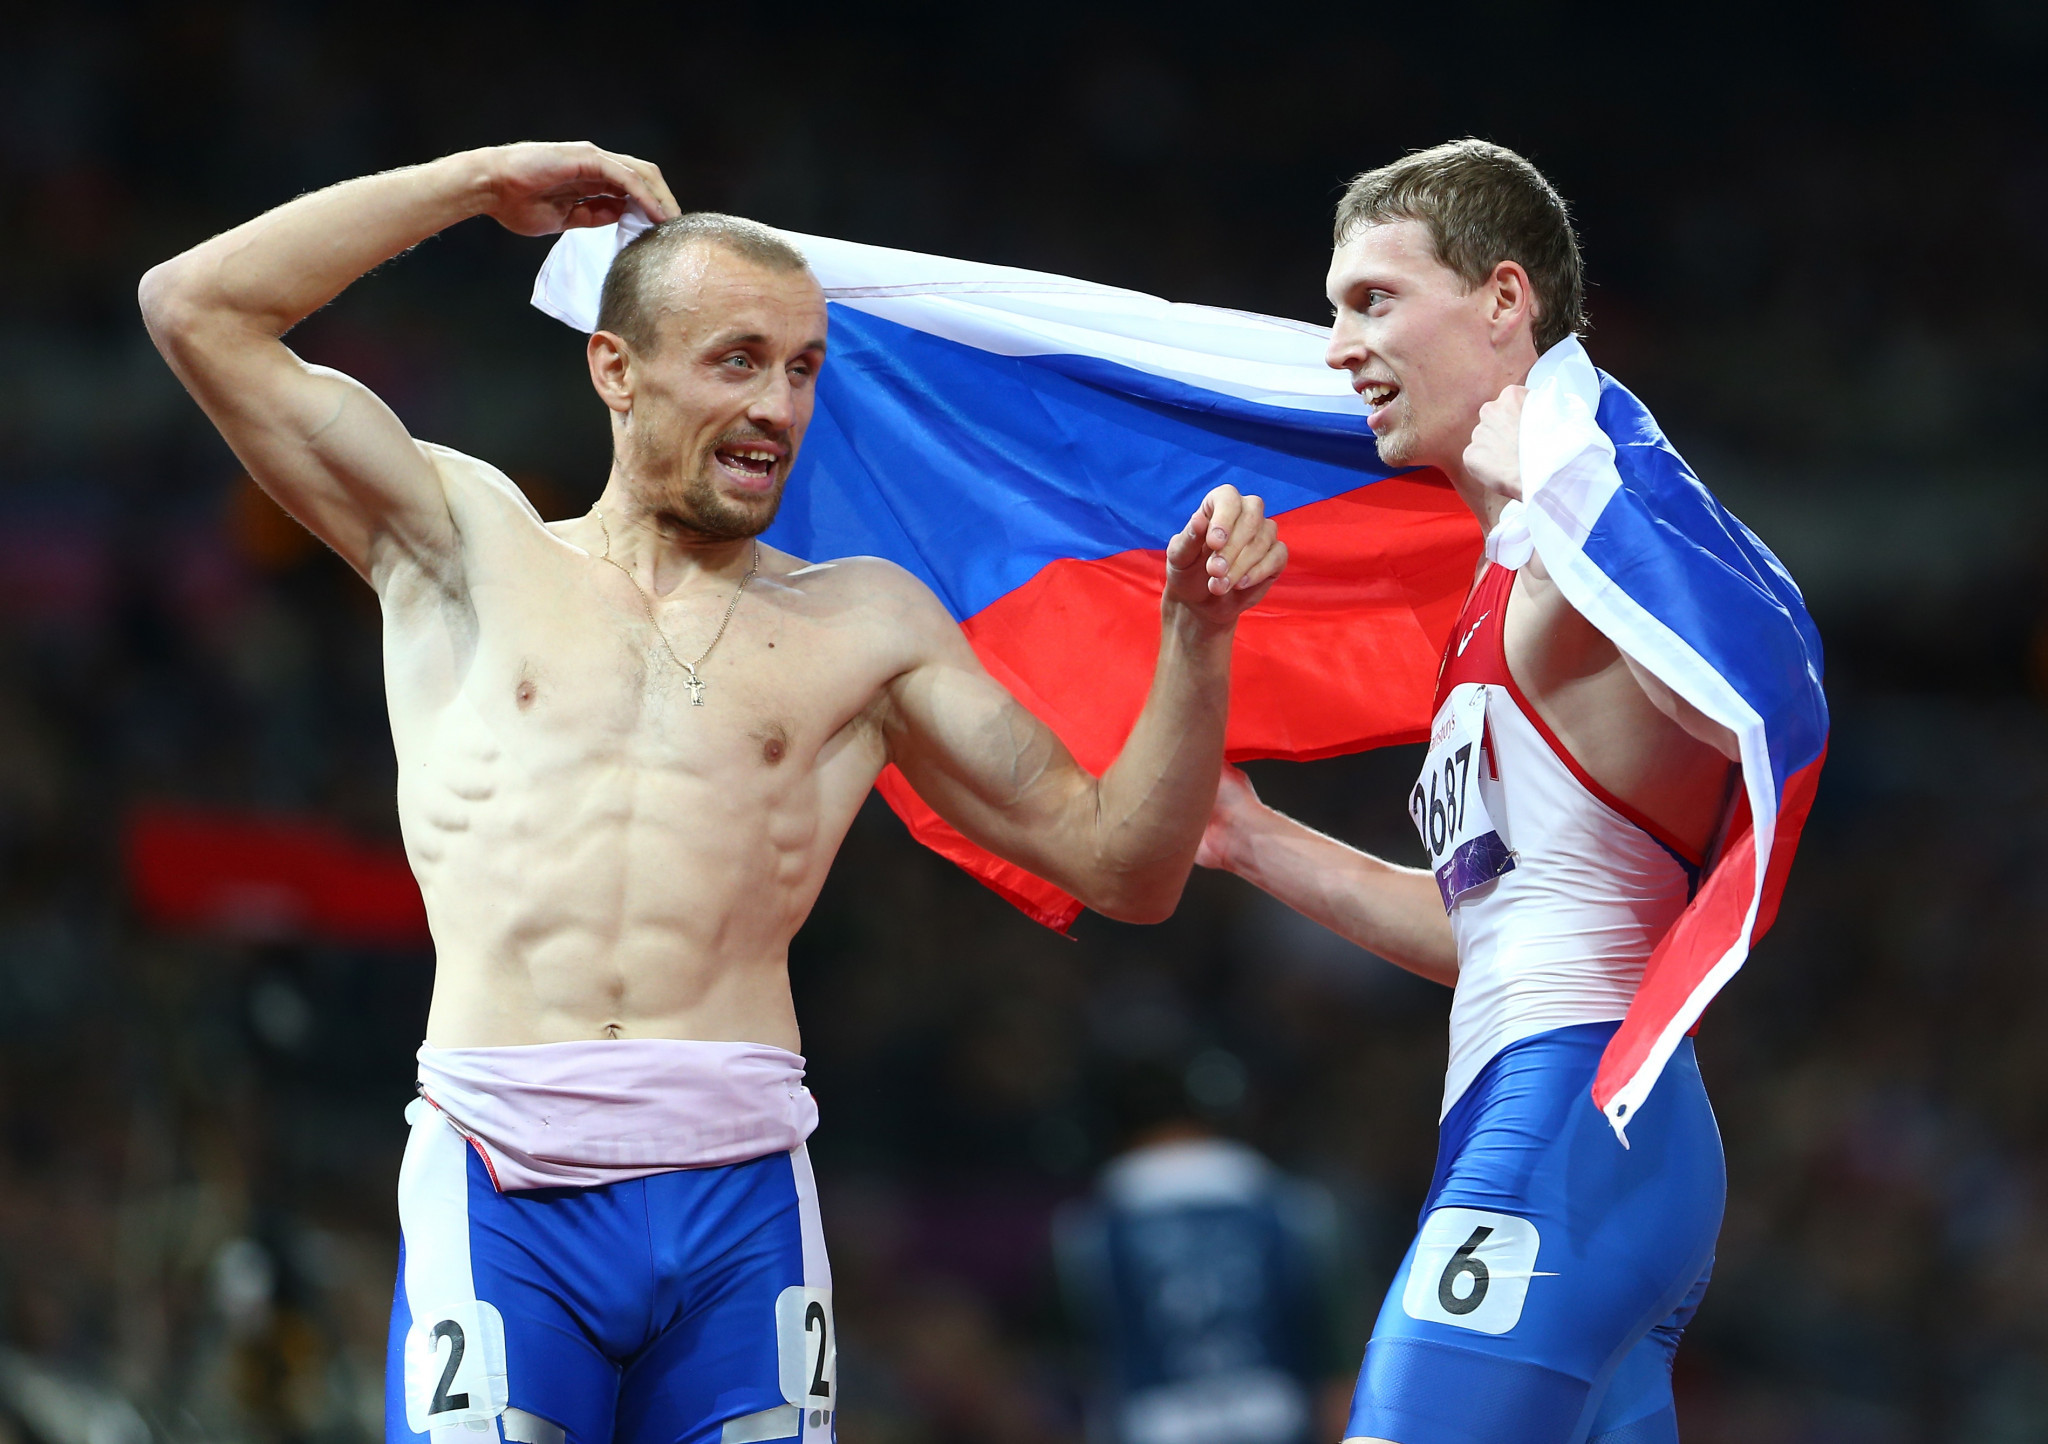 Russia finished second overall in the medals at London 2012, the last time they competed at the Summer Paralympic Games having been banned by the IPC from Rio 2016 ©Getty Images